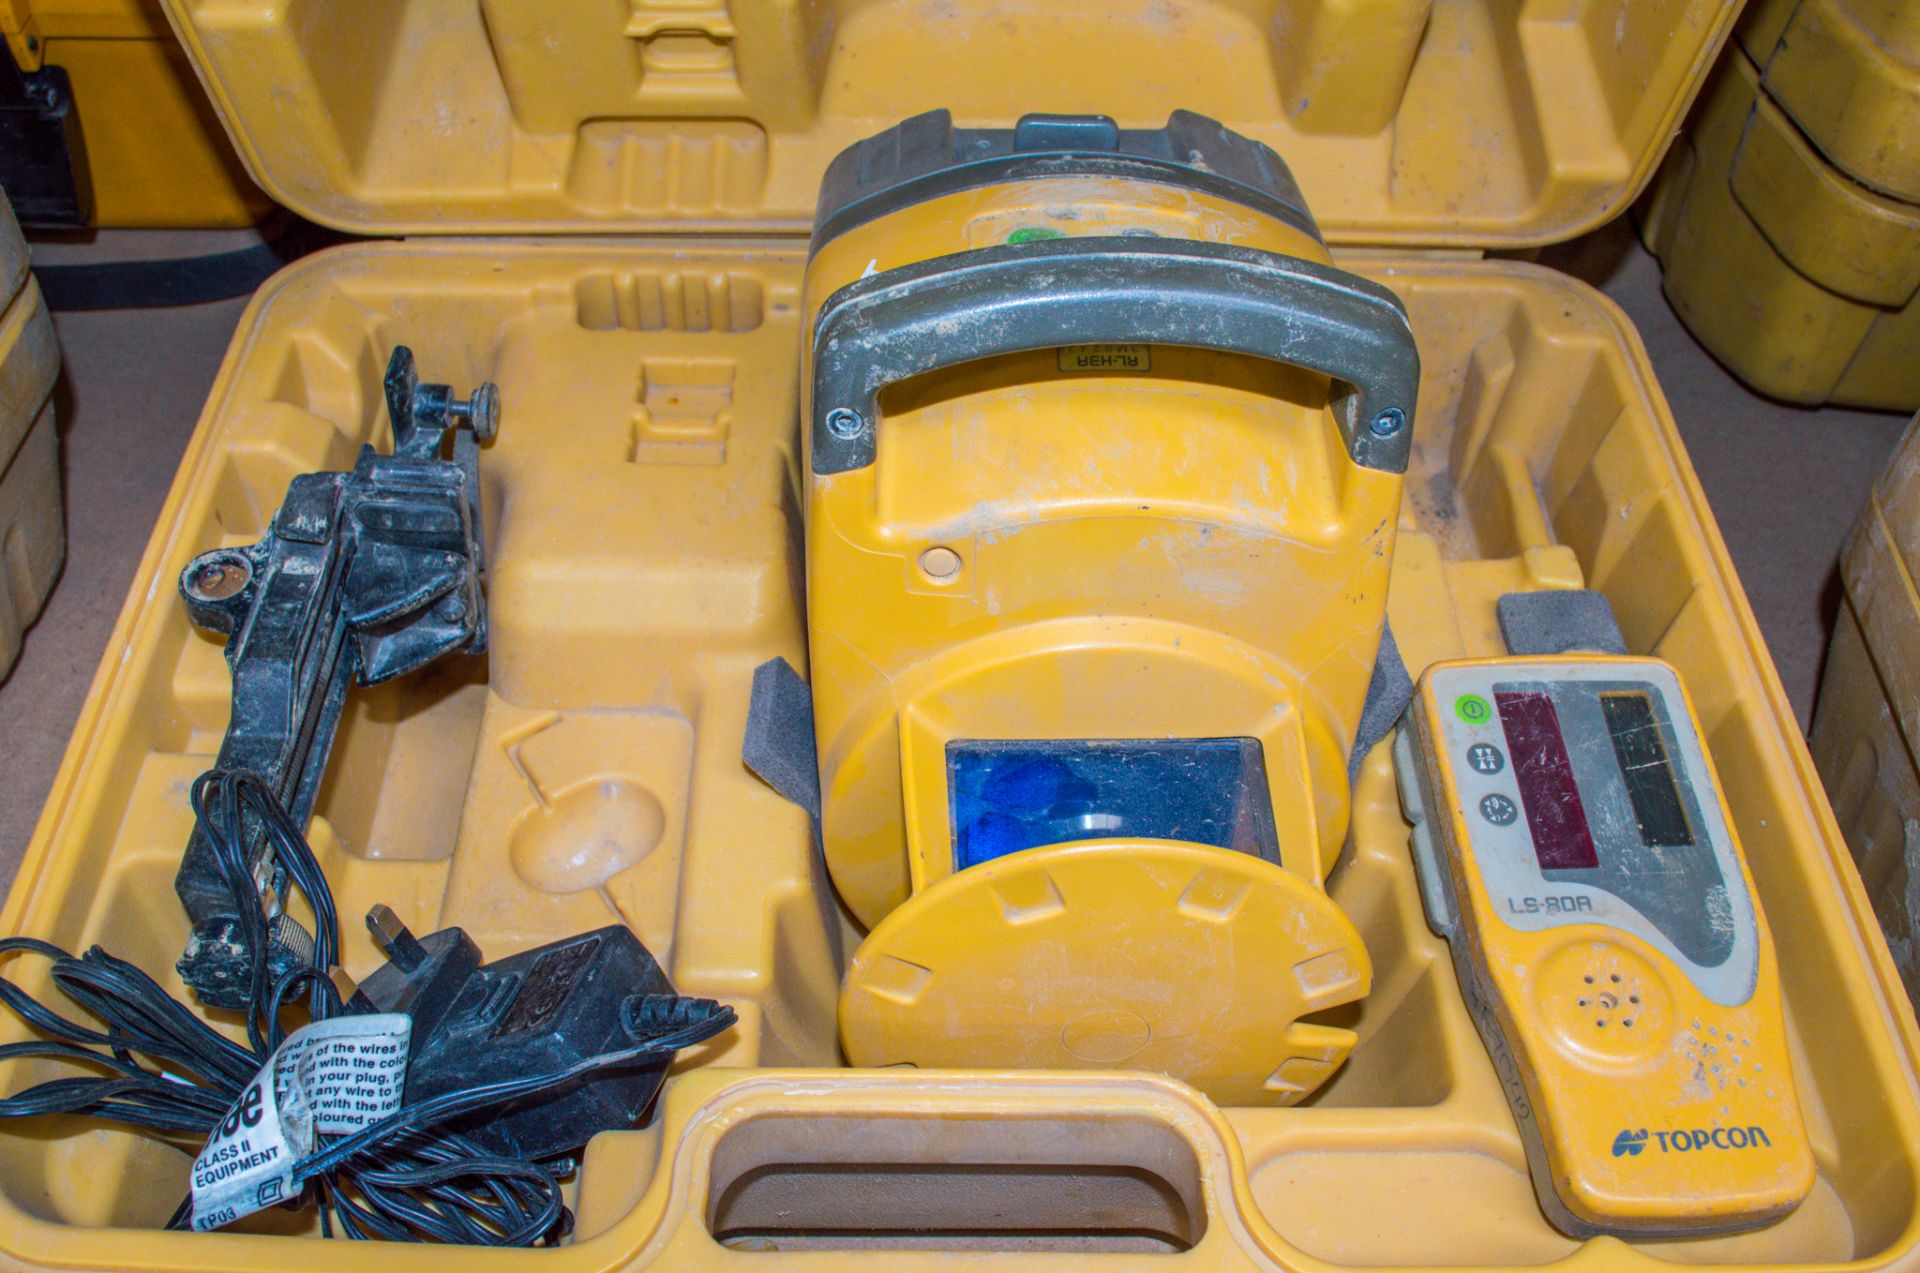 Topcon RL-H3A rotating laser level c/w charger, battery, Topcon LS-80A receiver & carry case